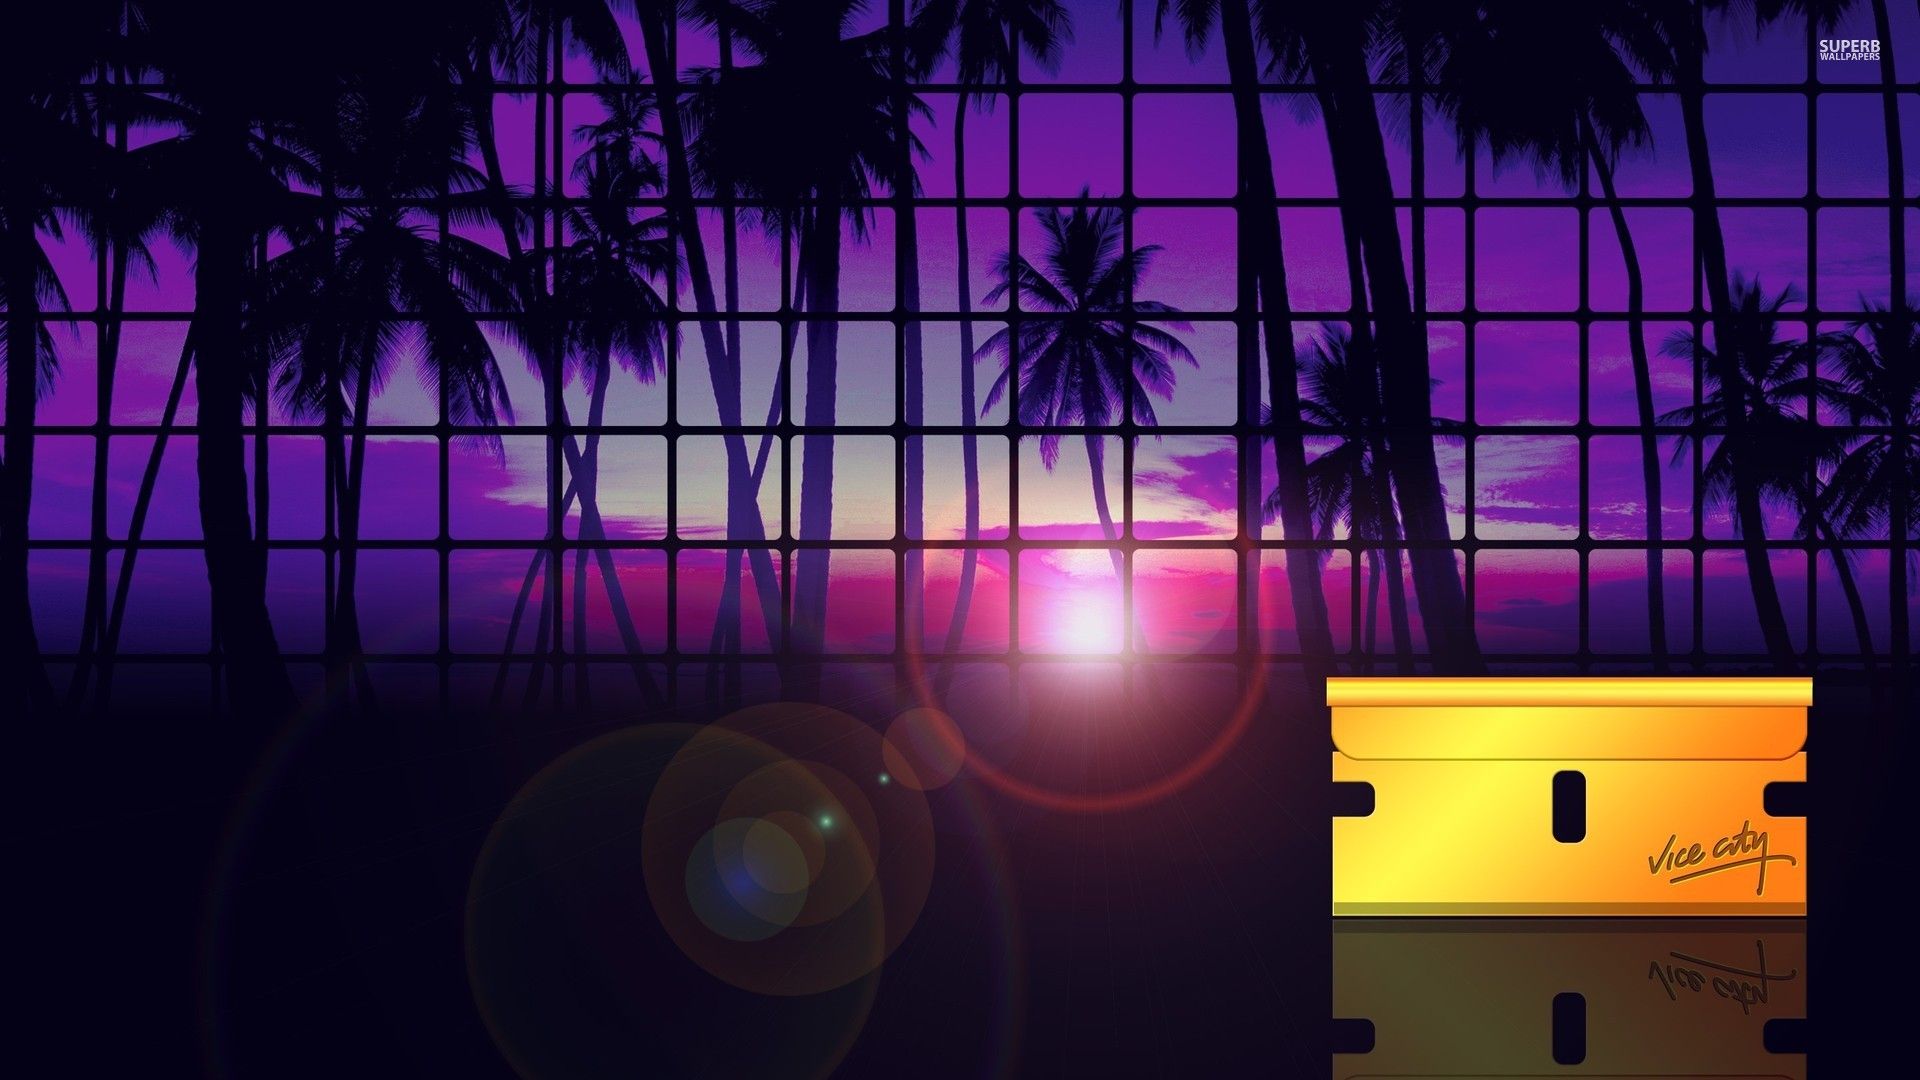 Grand Theft Auto: Vice City sunset wallpaper - Game wallpapers ...